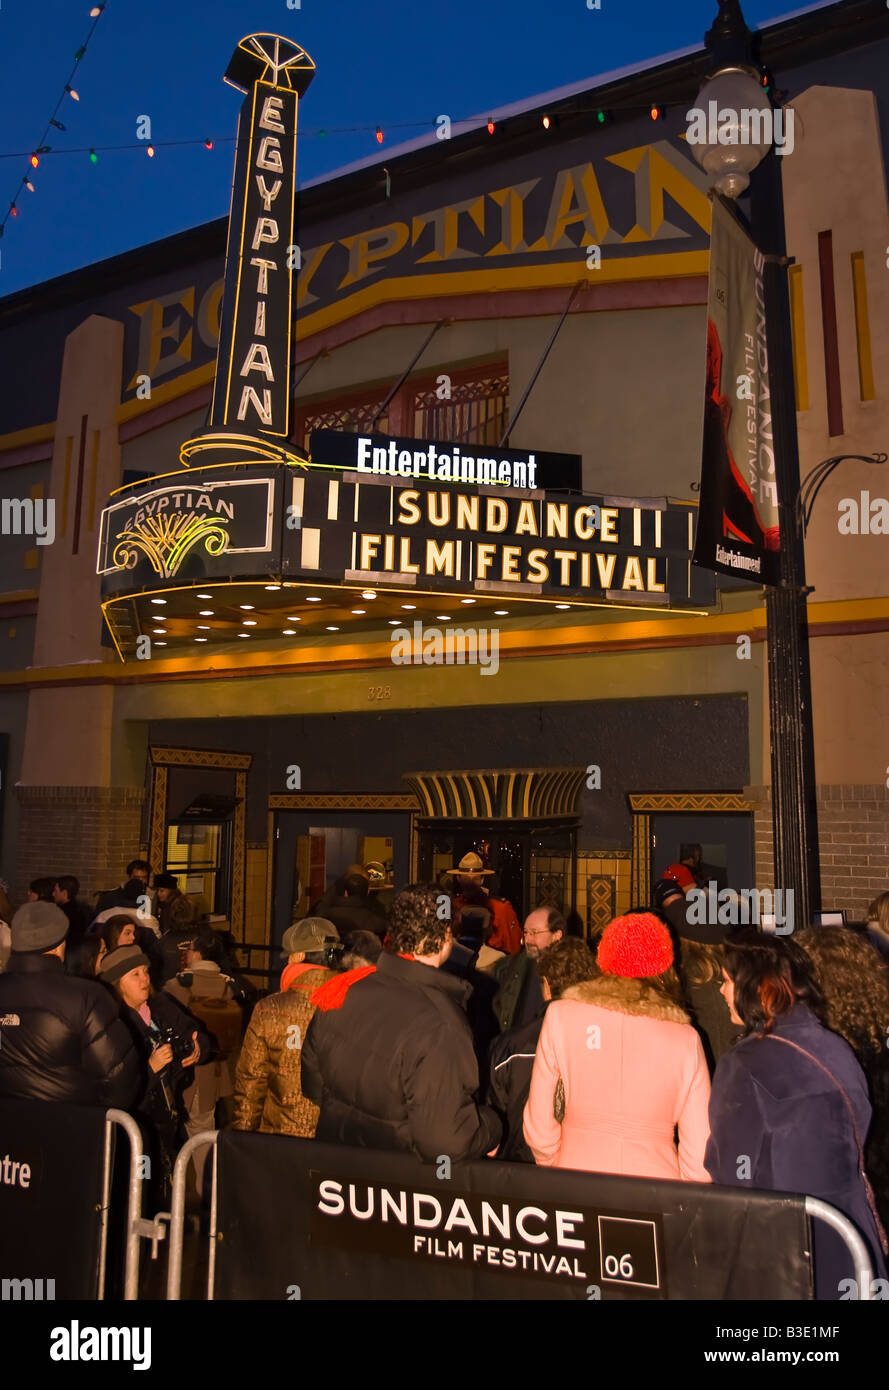 PARK CITY UTAH USA - People at the Egyptian Theatre on Main Street during the Sundance Film Festival Stock Photo